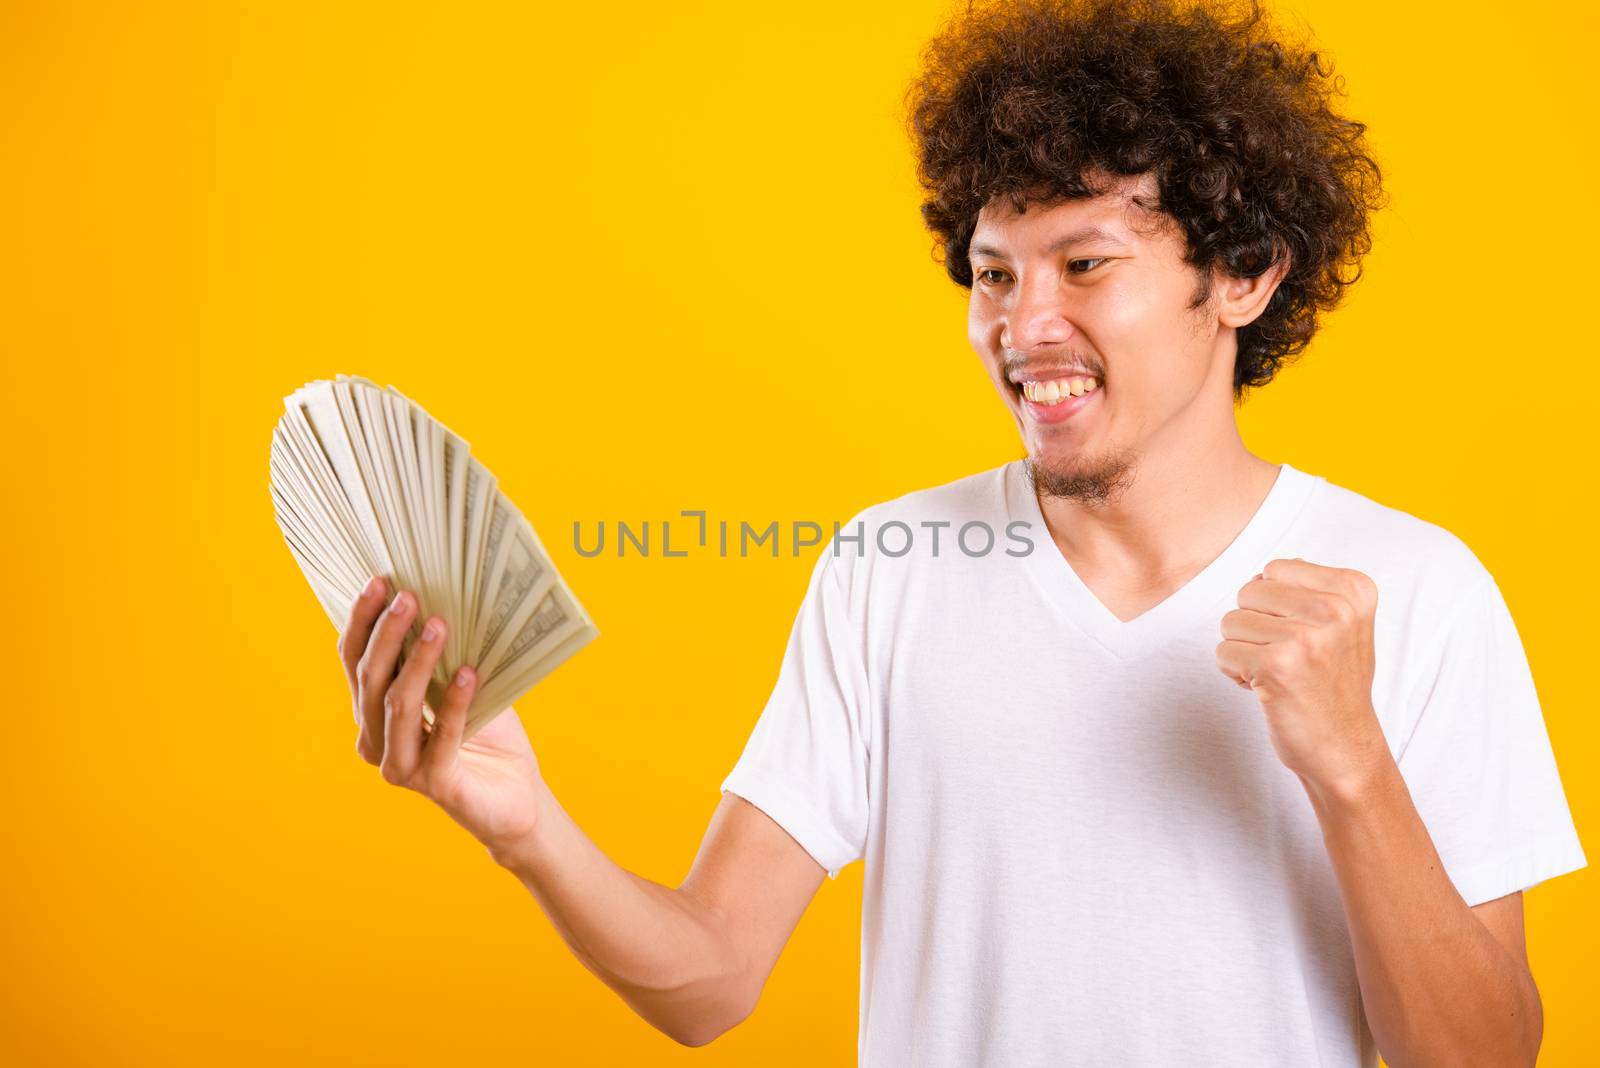 Asian handsome man with curly hair holding fans of money dollar bills isolate on yellow background with copy space for text